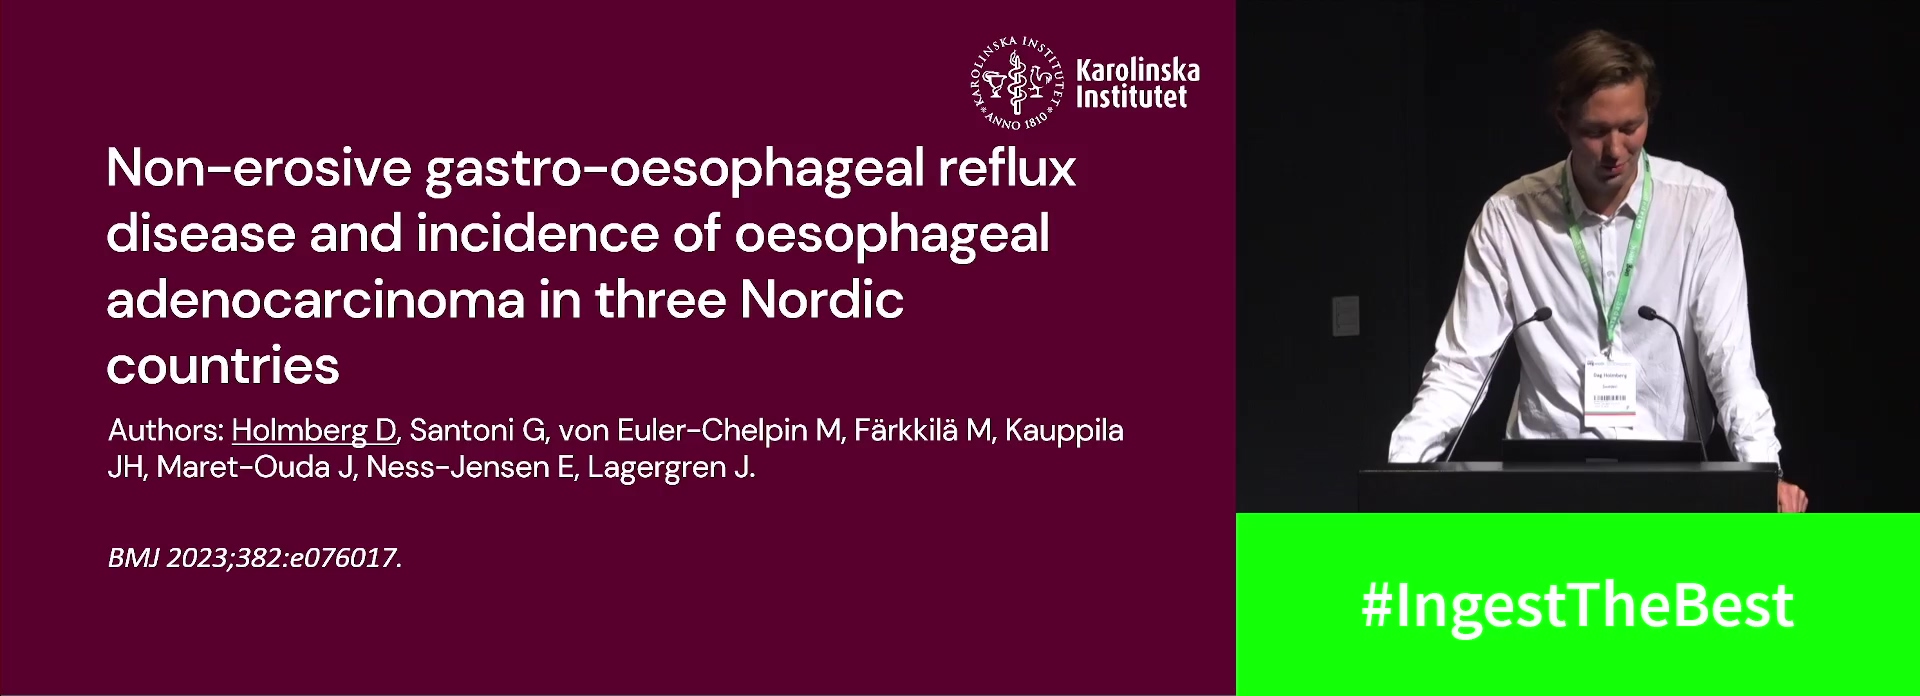 NON-EROSIVE GASTROESOPHAGEAL REFLUX DISEASE AND RISK OF ESOPHAGEAL ADENOCARCINOMA